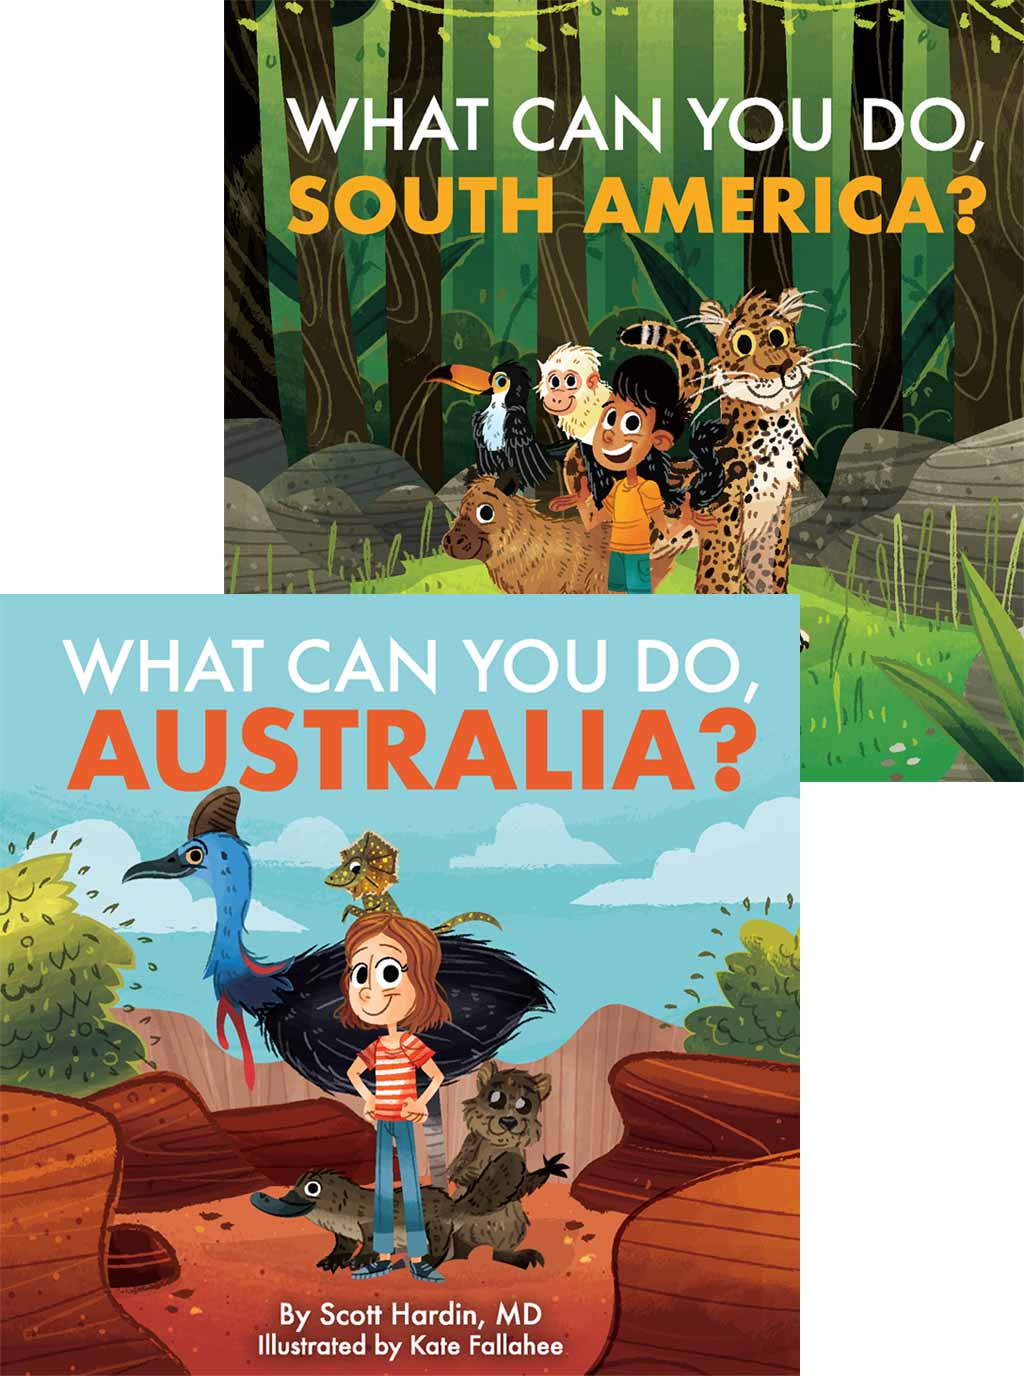 Christian board books covers set in Australia and South America showing native animals